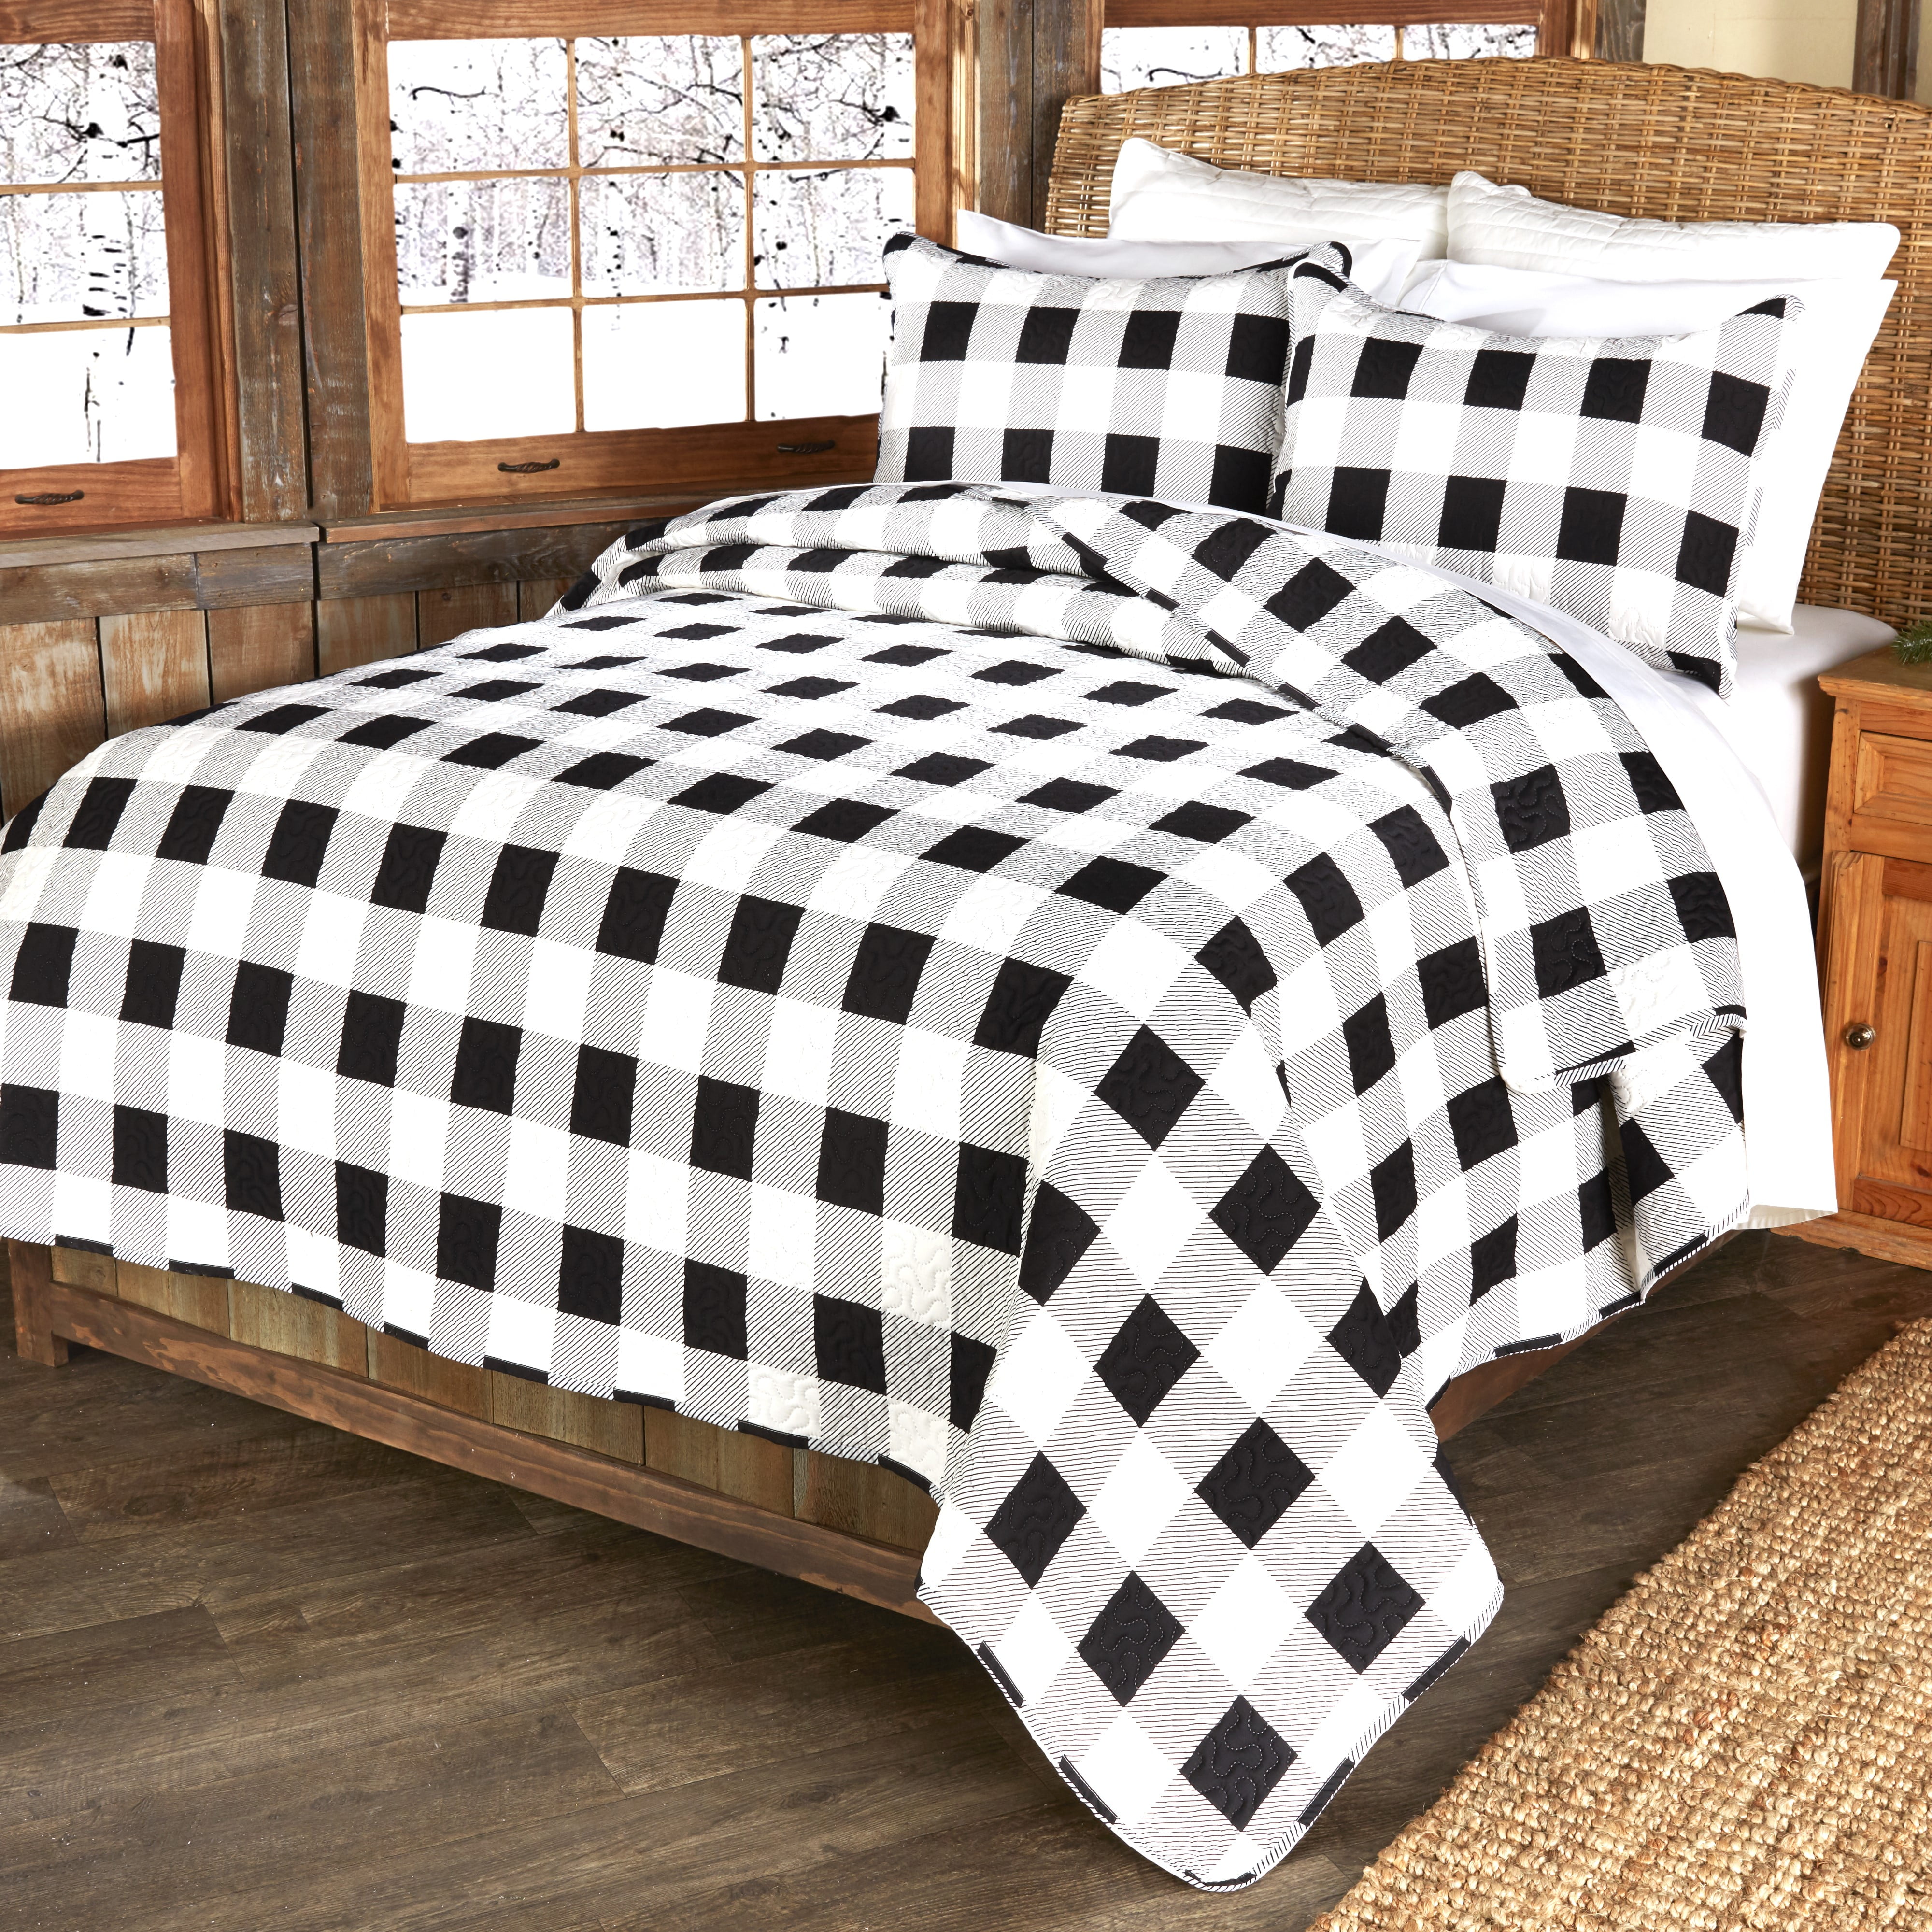 Check Pattern 3 Piece Quilted Bedspread Printed Patchwork Comforter Bed Throw with Pillowshams Check Denim Blue, Double